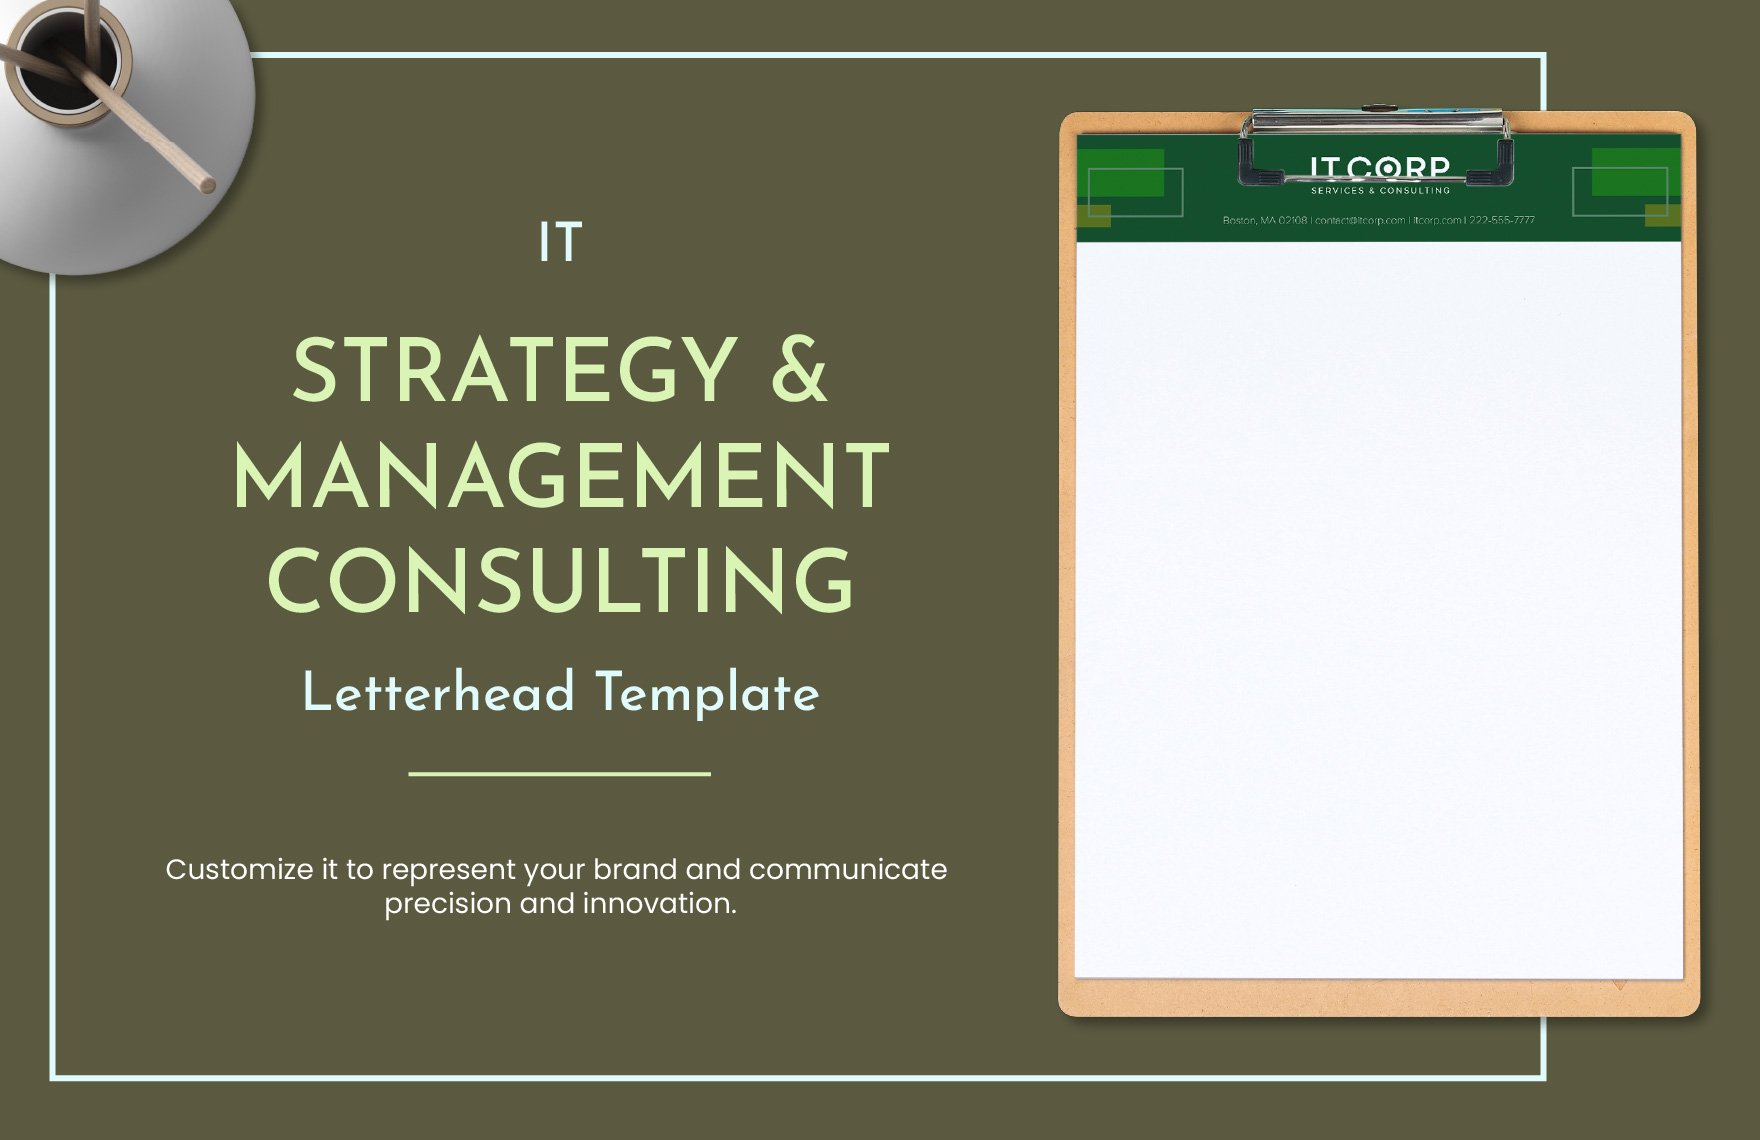 IT Strategy & Management Consulting Letterhead Template